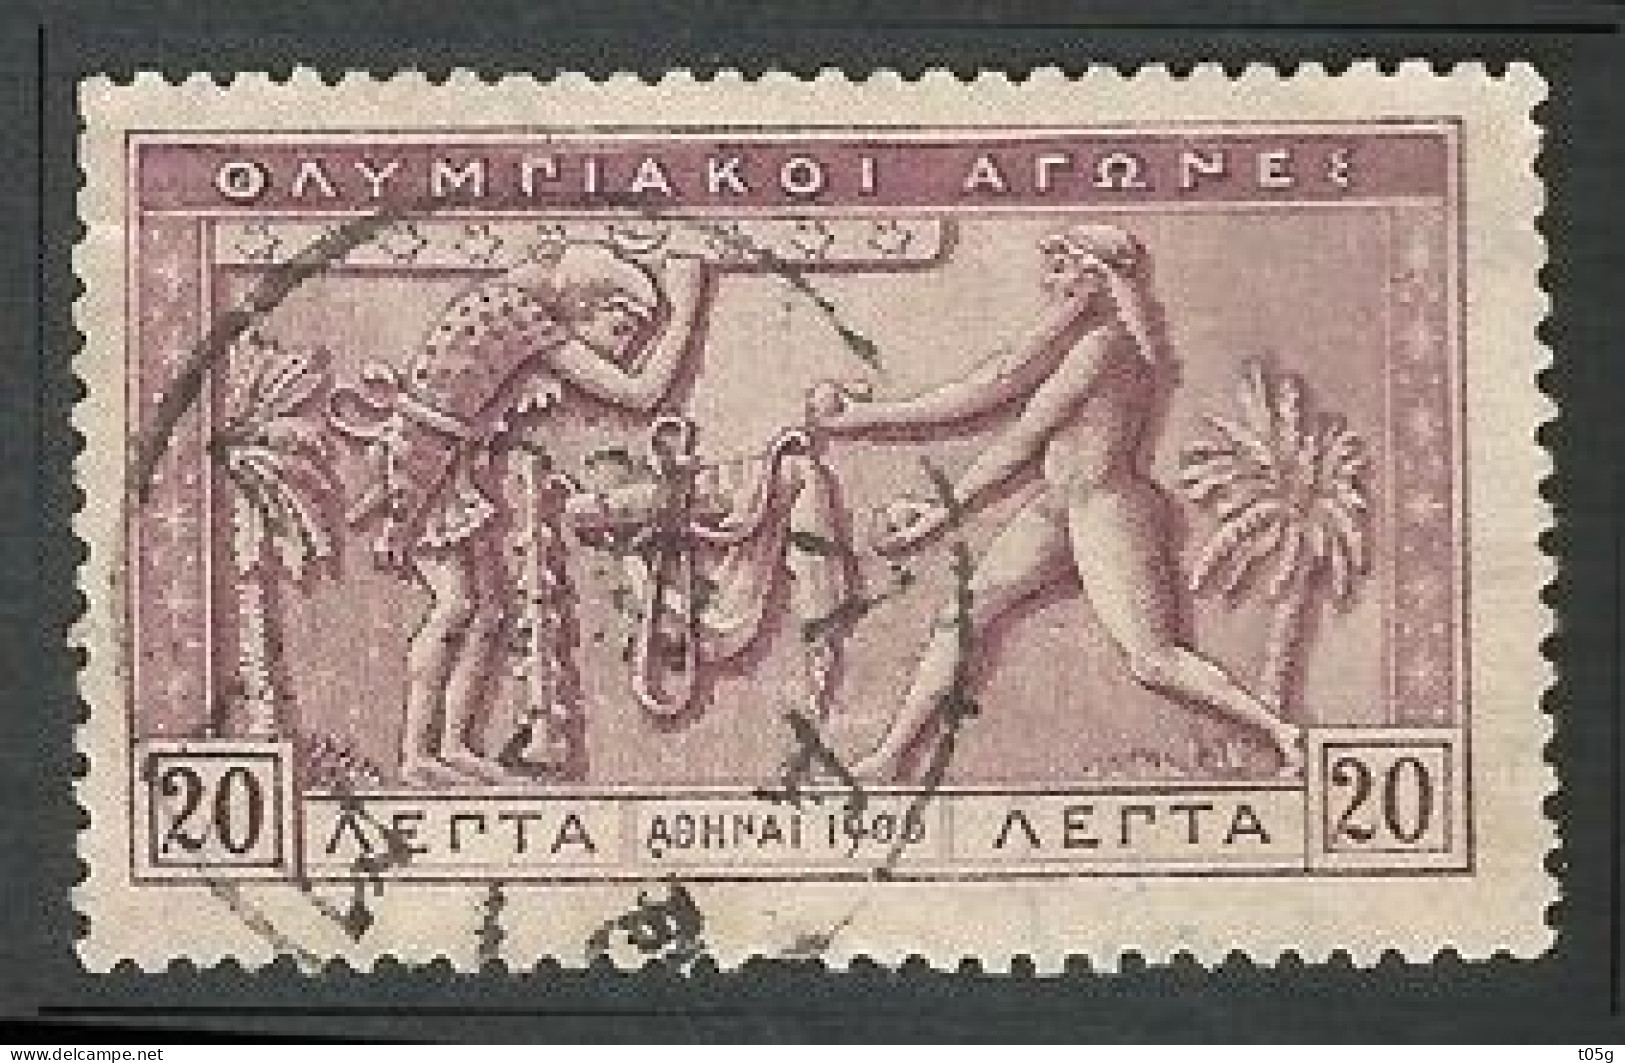 GREECE- GRECE -HELLAS 1906: 20L Second Olympic Games Of Athens - Gebraucht